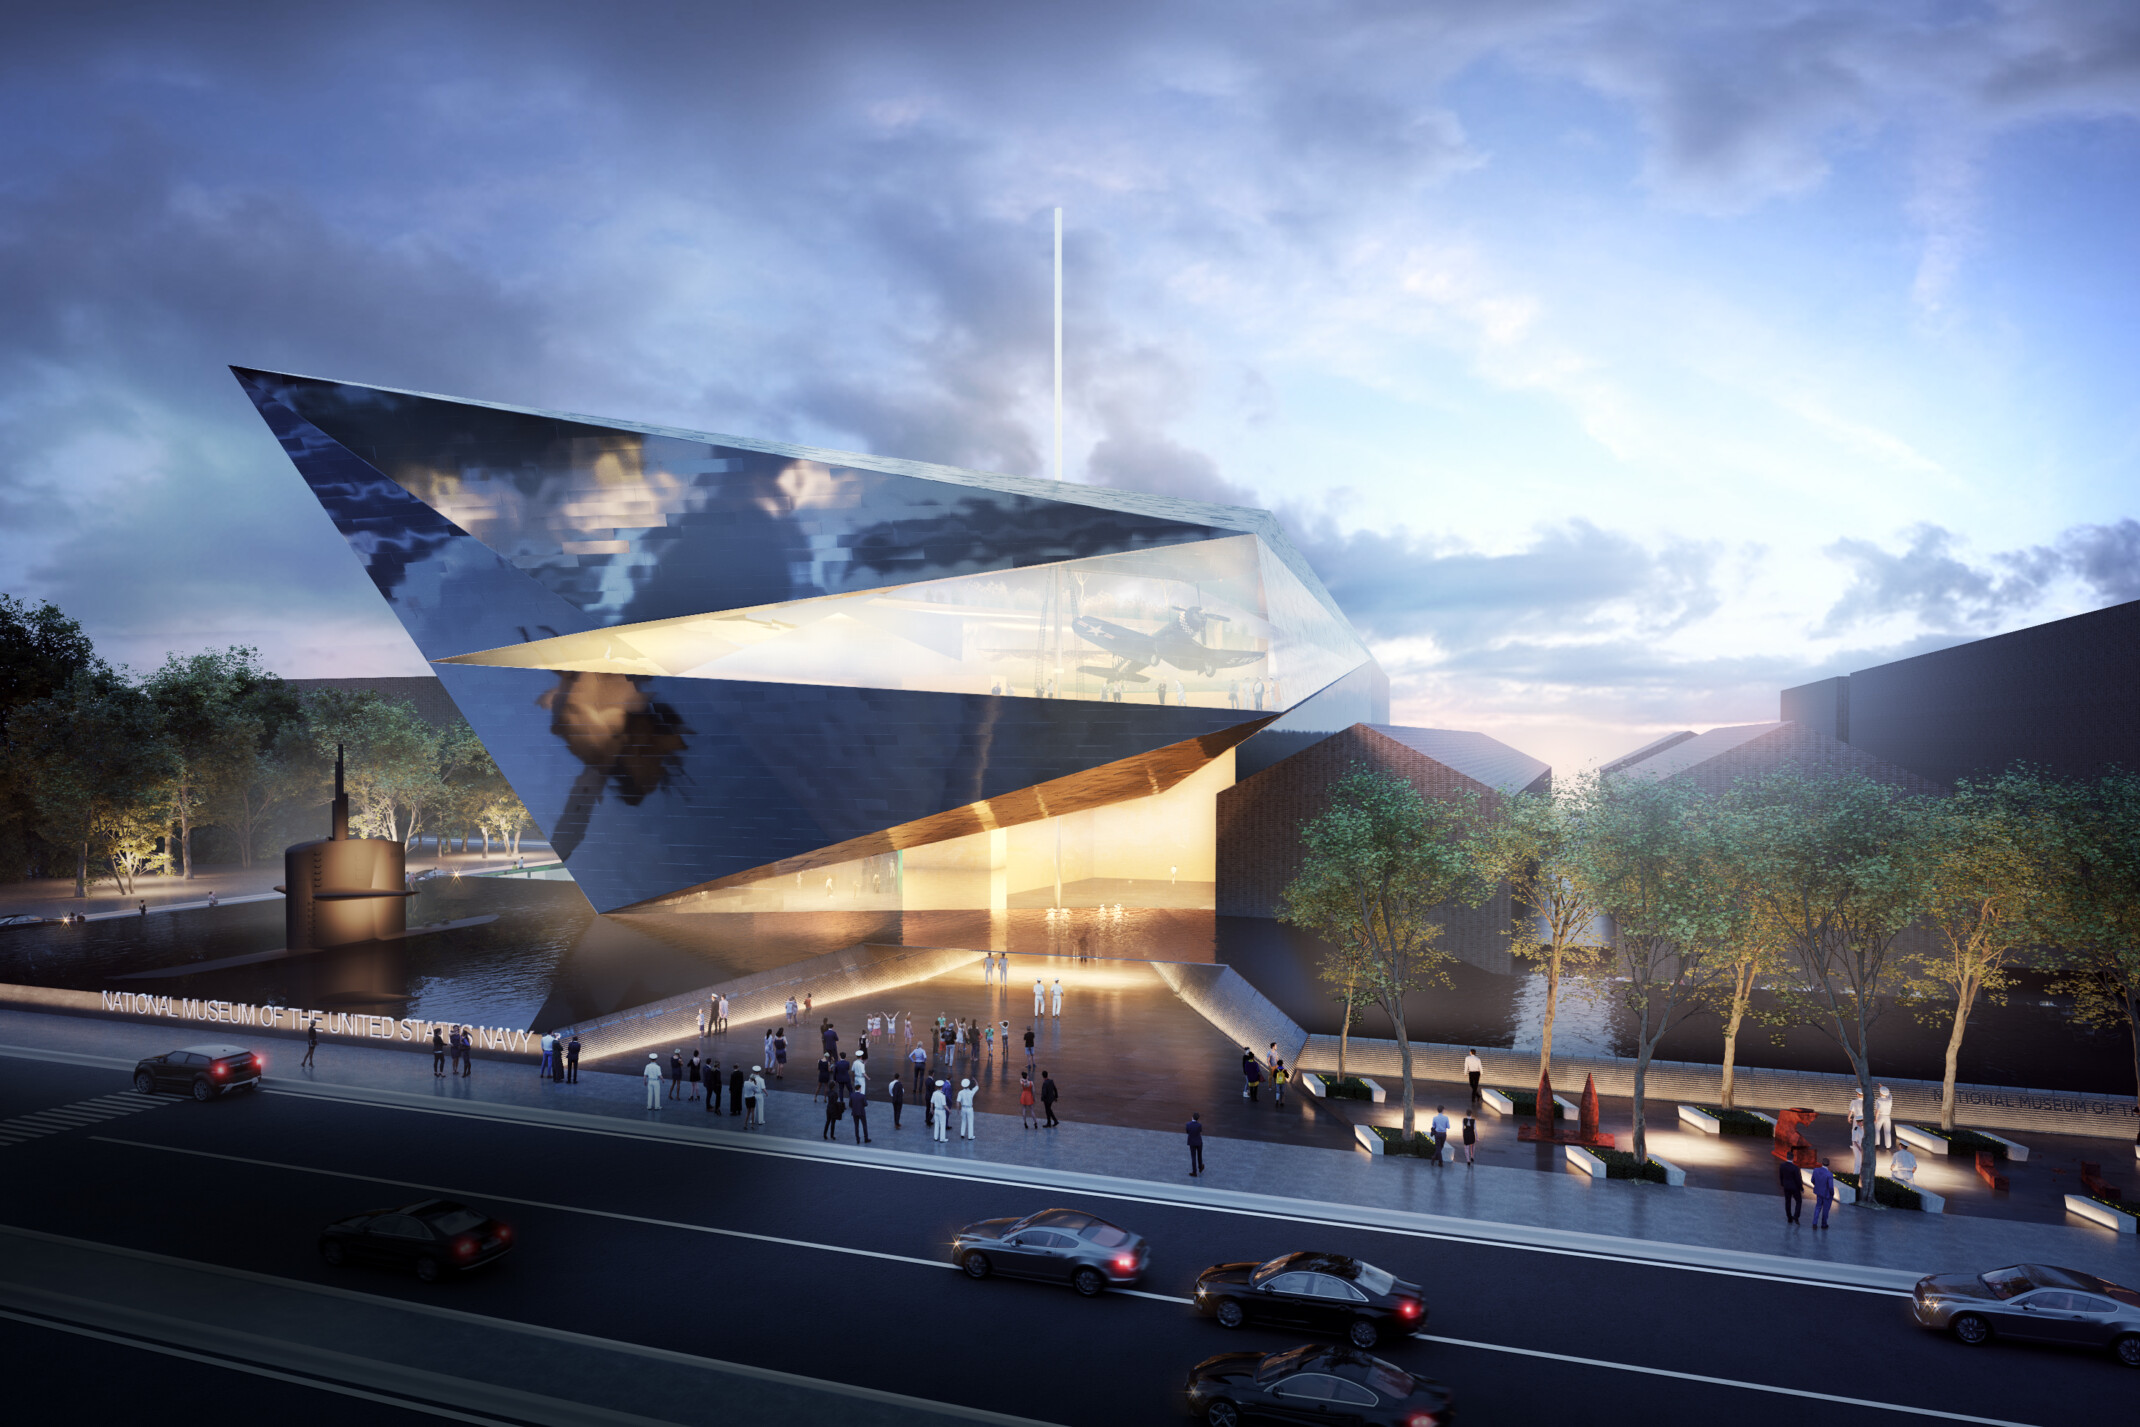 Angular multi-dimensional façade with water feature, main entrance with long driveway, design concept rendering of the National Museum of the U.S. Navy